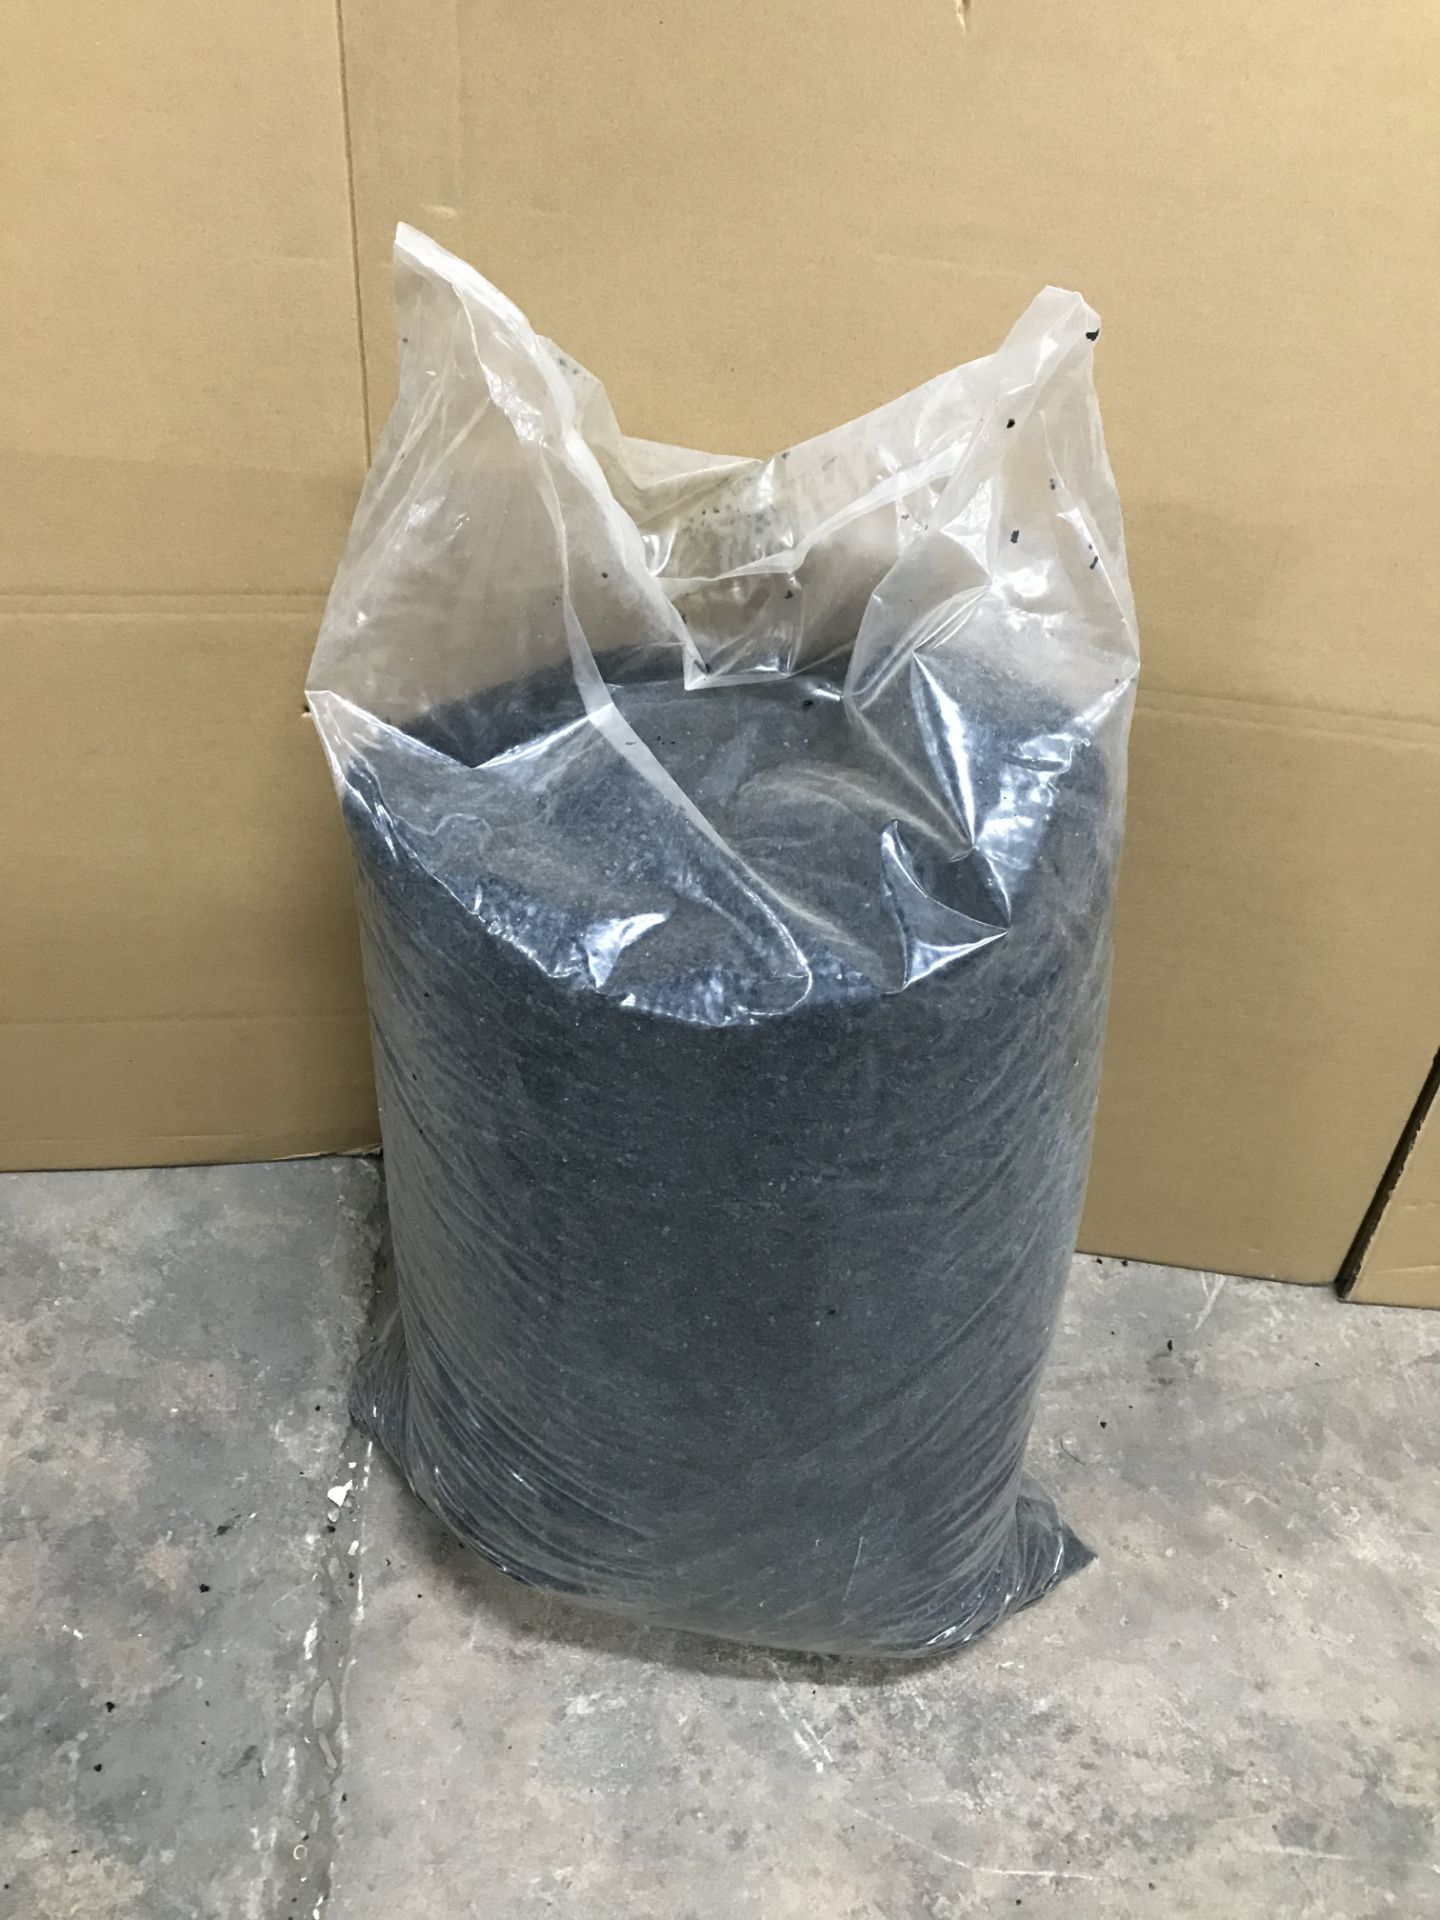 10 x Bags of Crumb Rubber